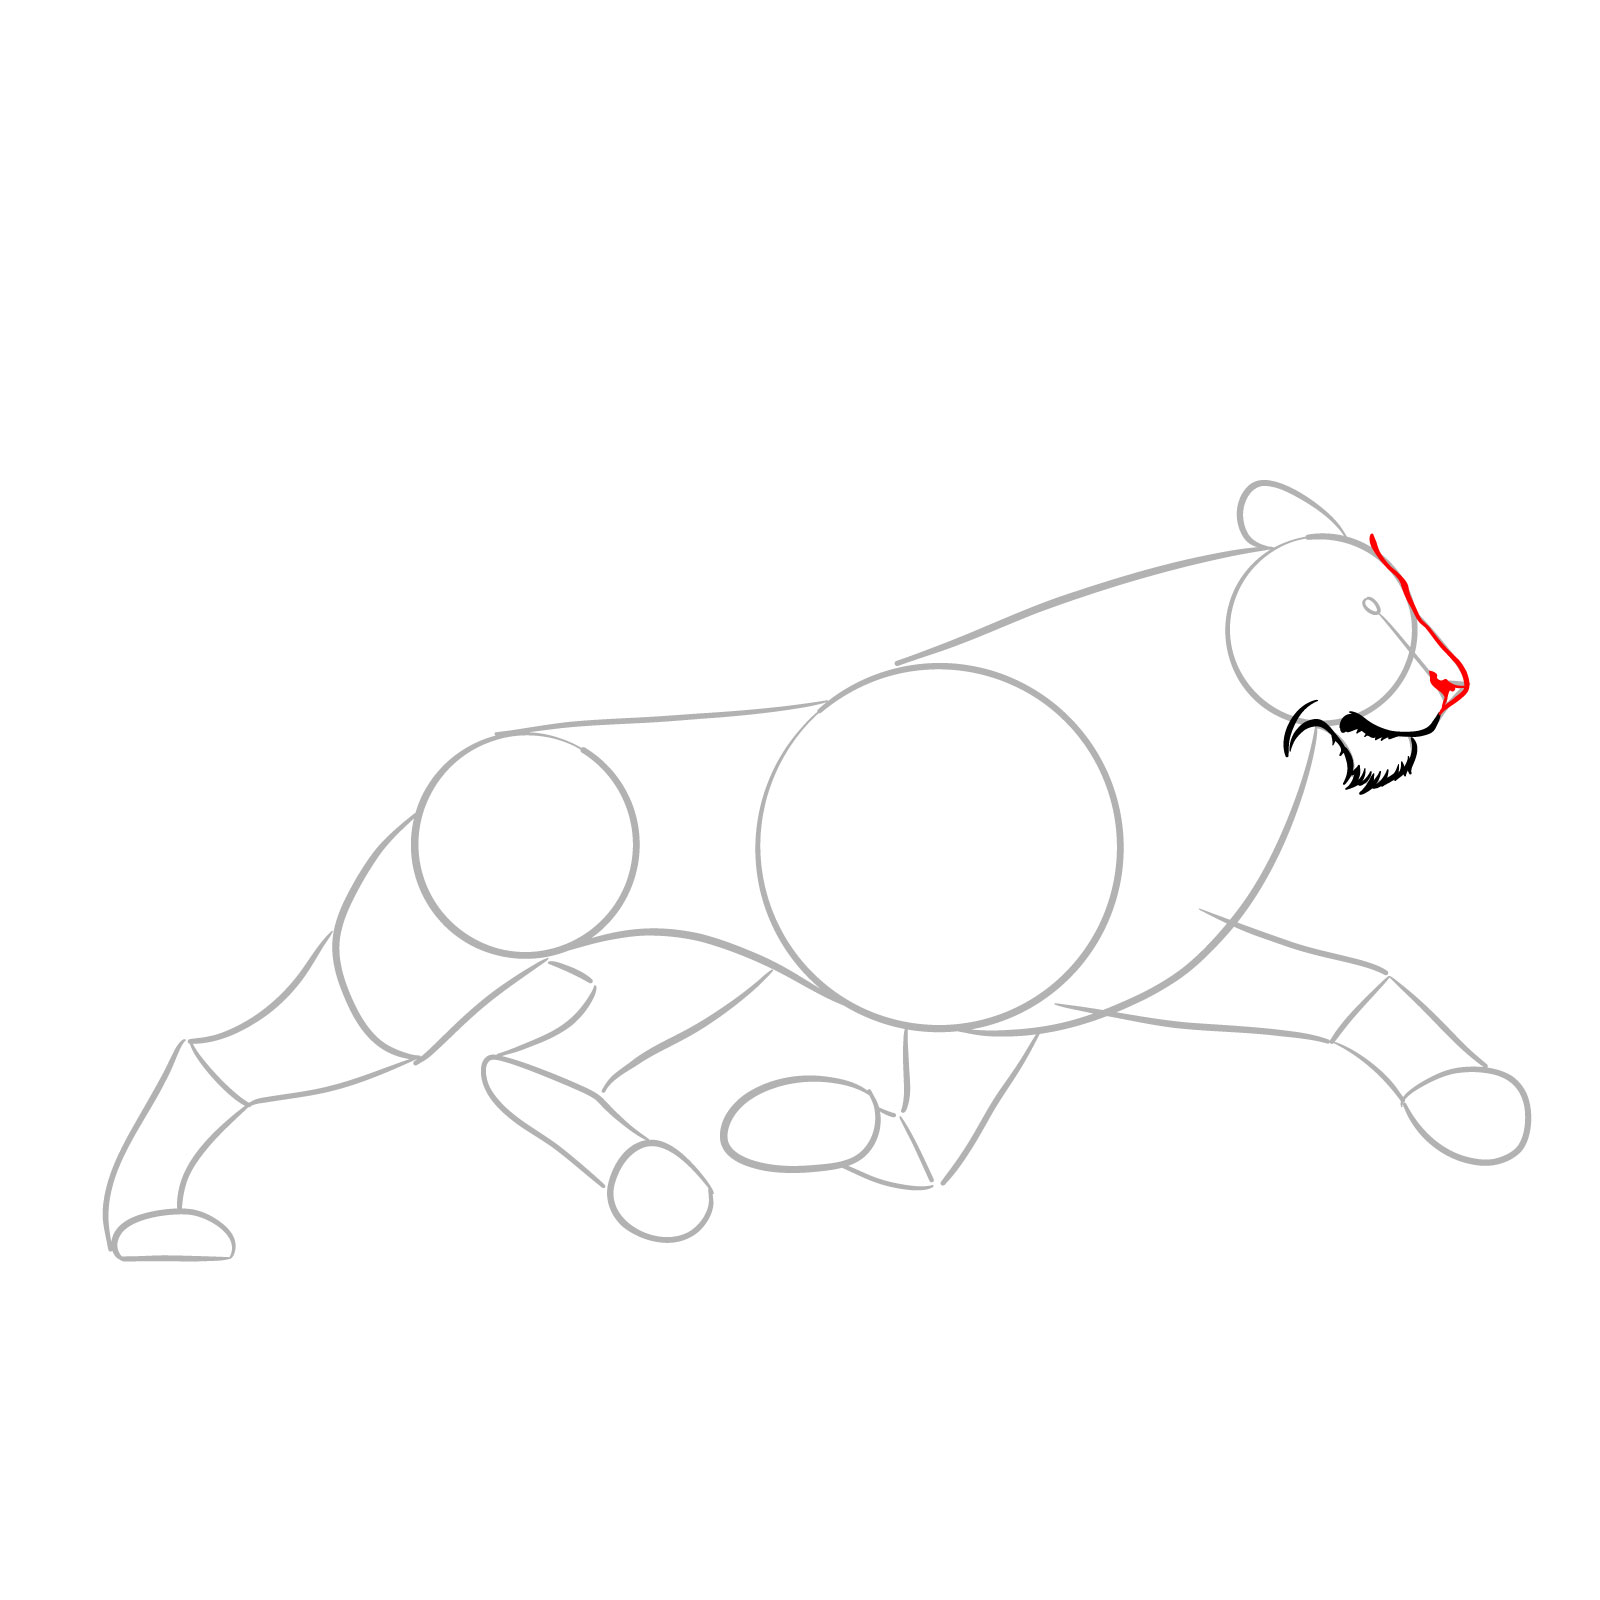 Defining the upper facial features of a running lion - step 04